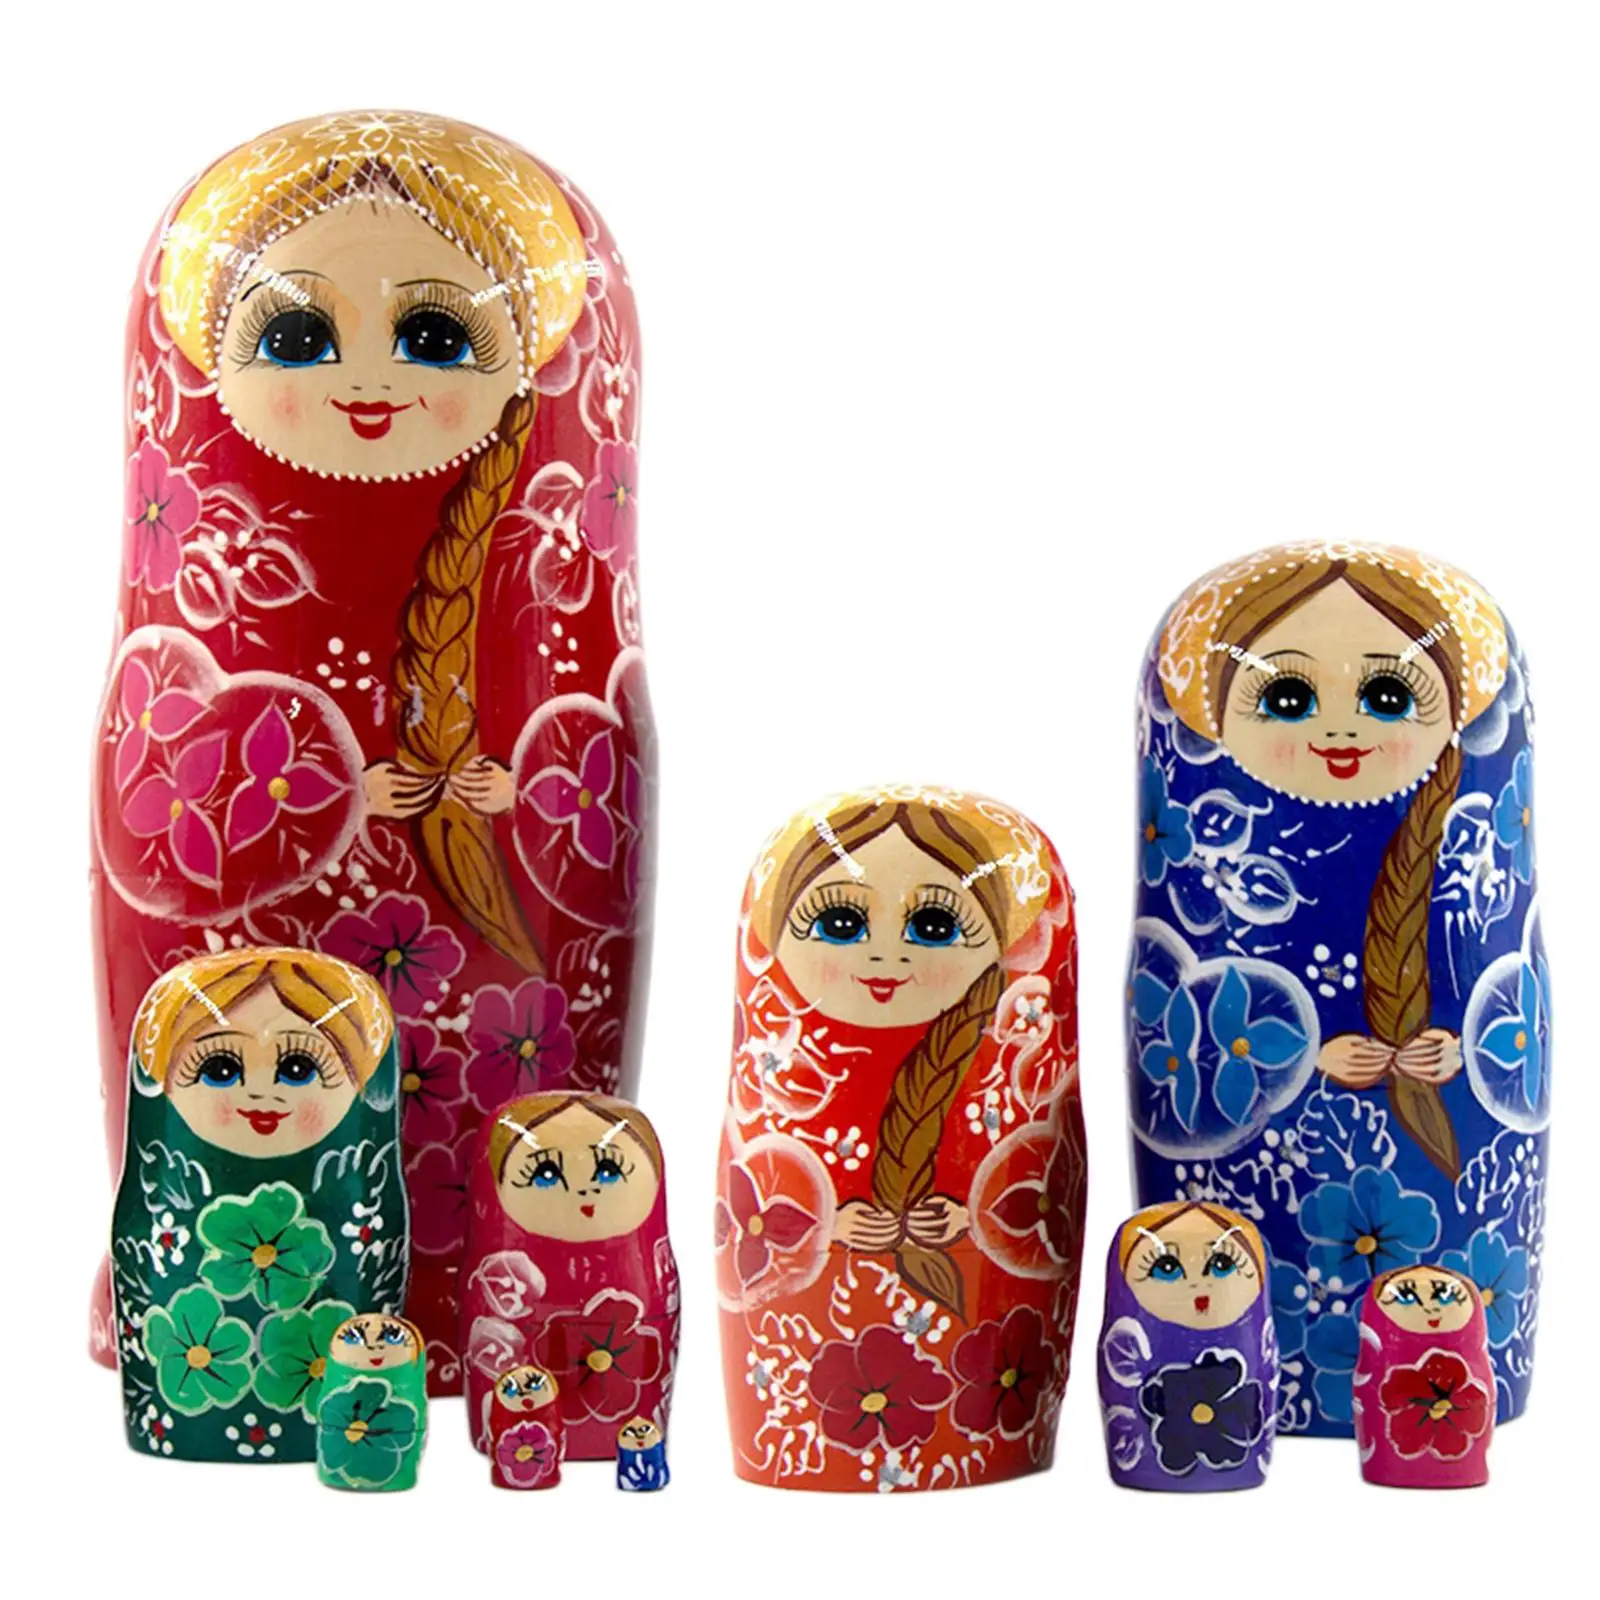 10 Pieces Nesting Dolls Toy Decoration for Themed Party Girls Boys Families